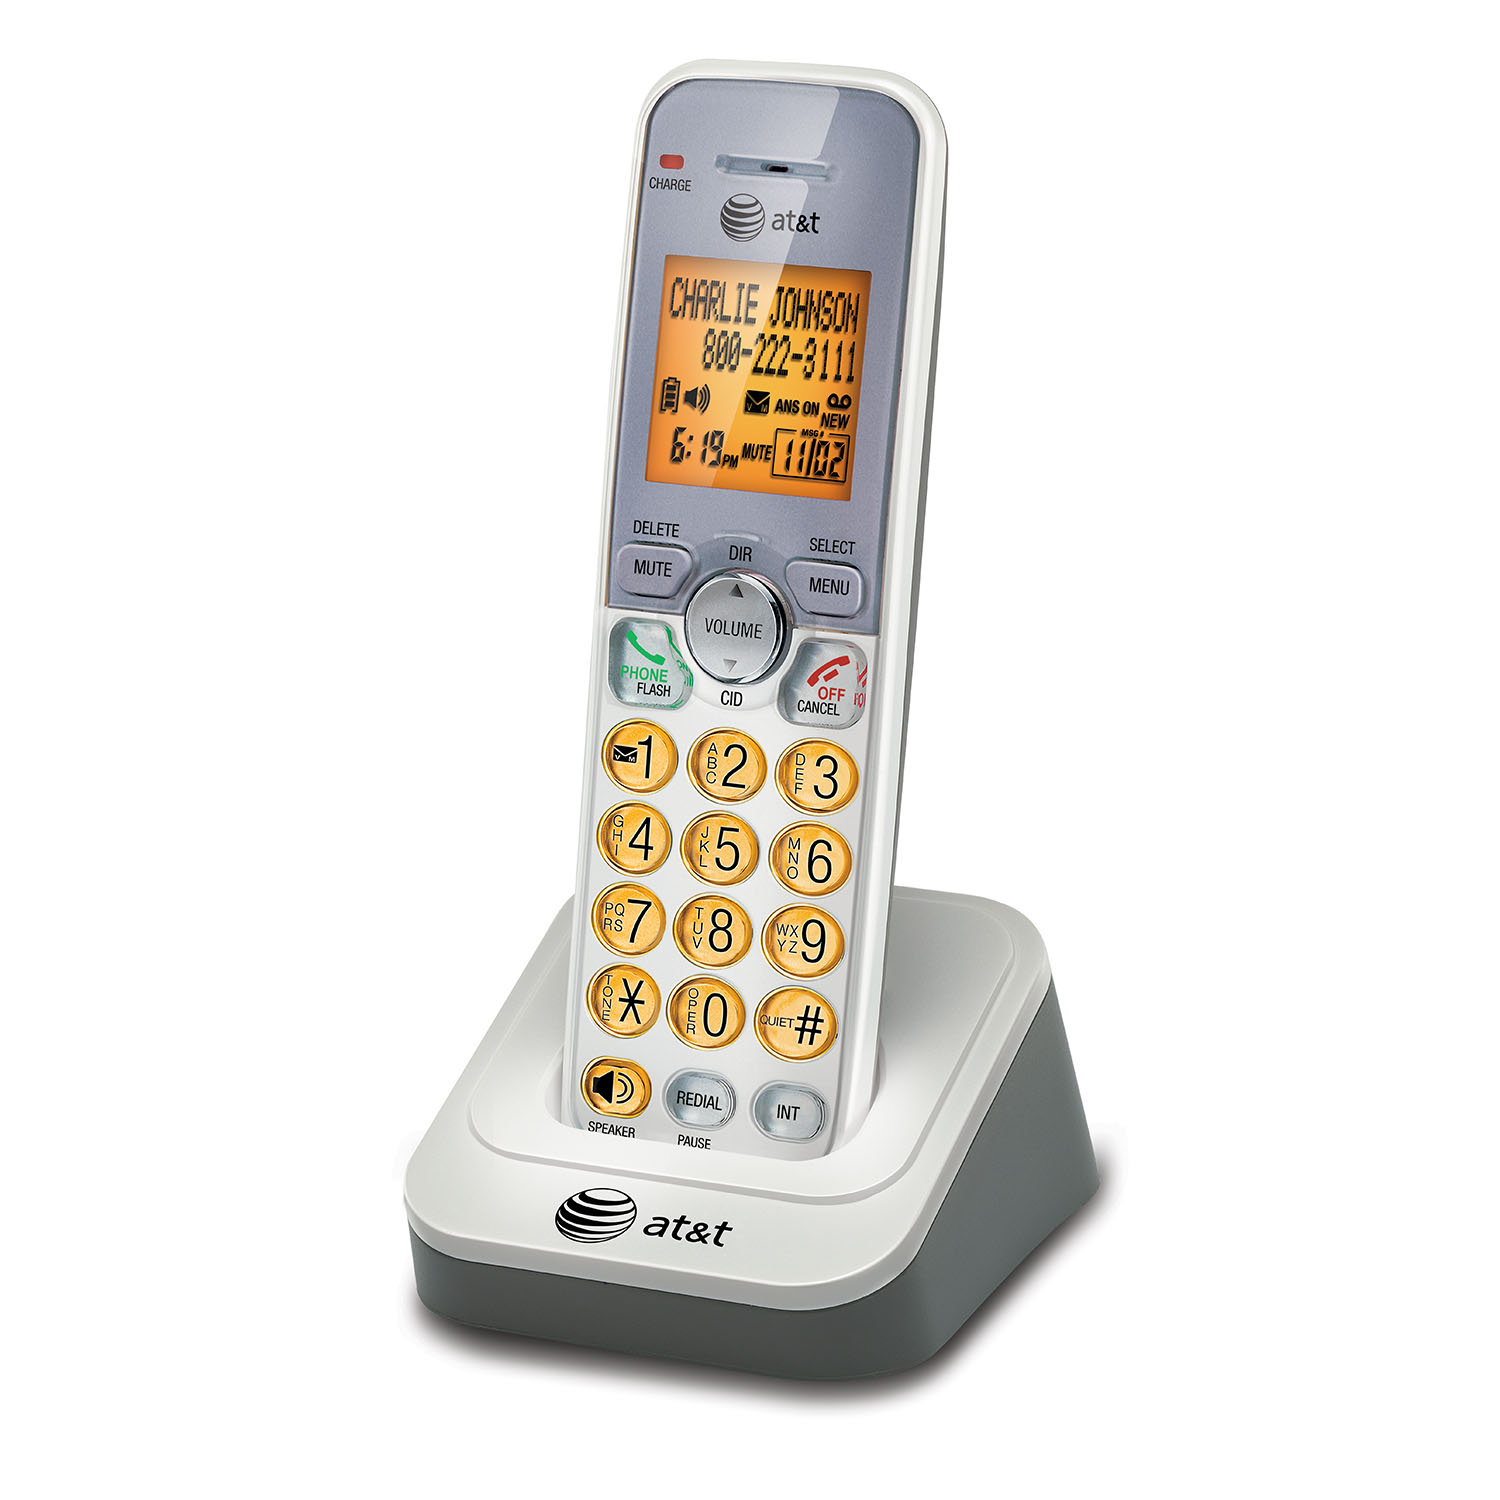 3 handset cordless answering system with caller ID/call waiting - view 5